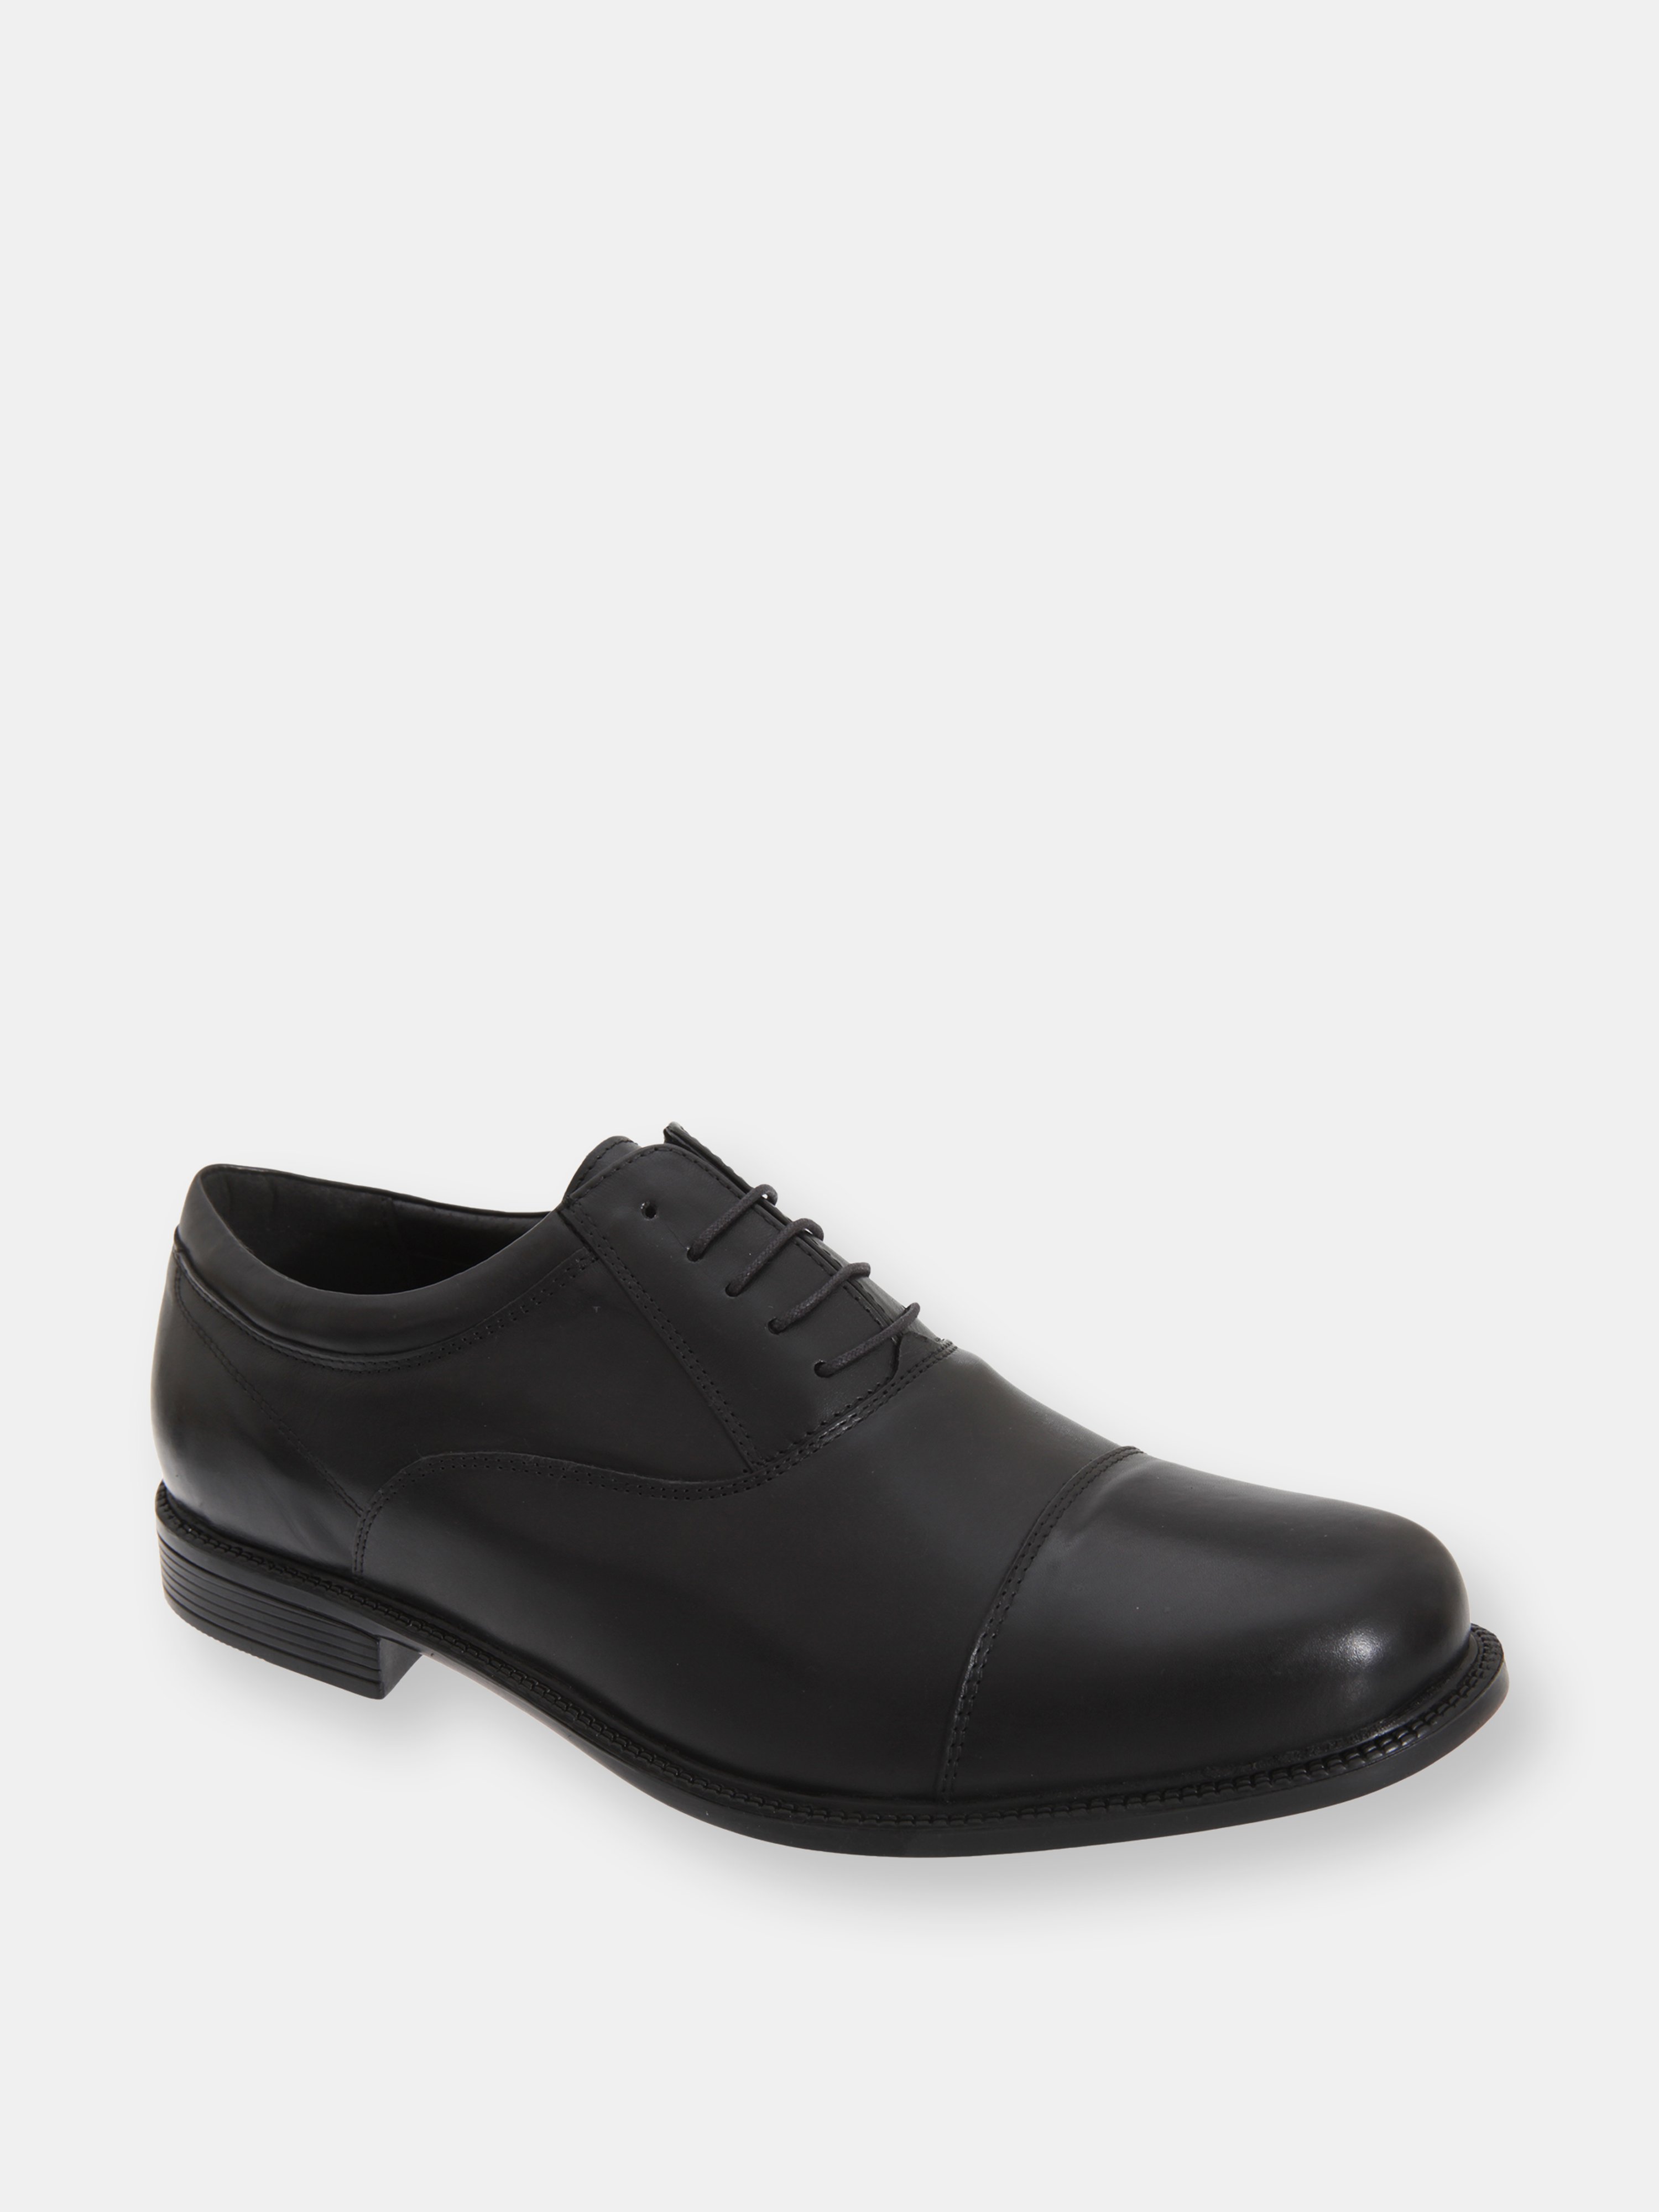 ROAMERS ROAMERS MENS FULLER FITTING CAPPED LEATHER OXFORD SHOES (BLACK)